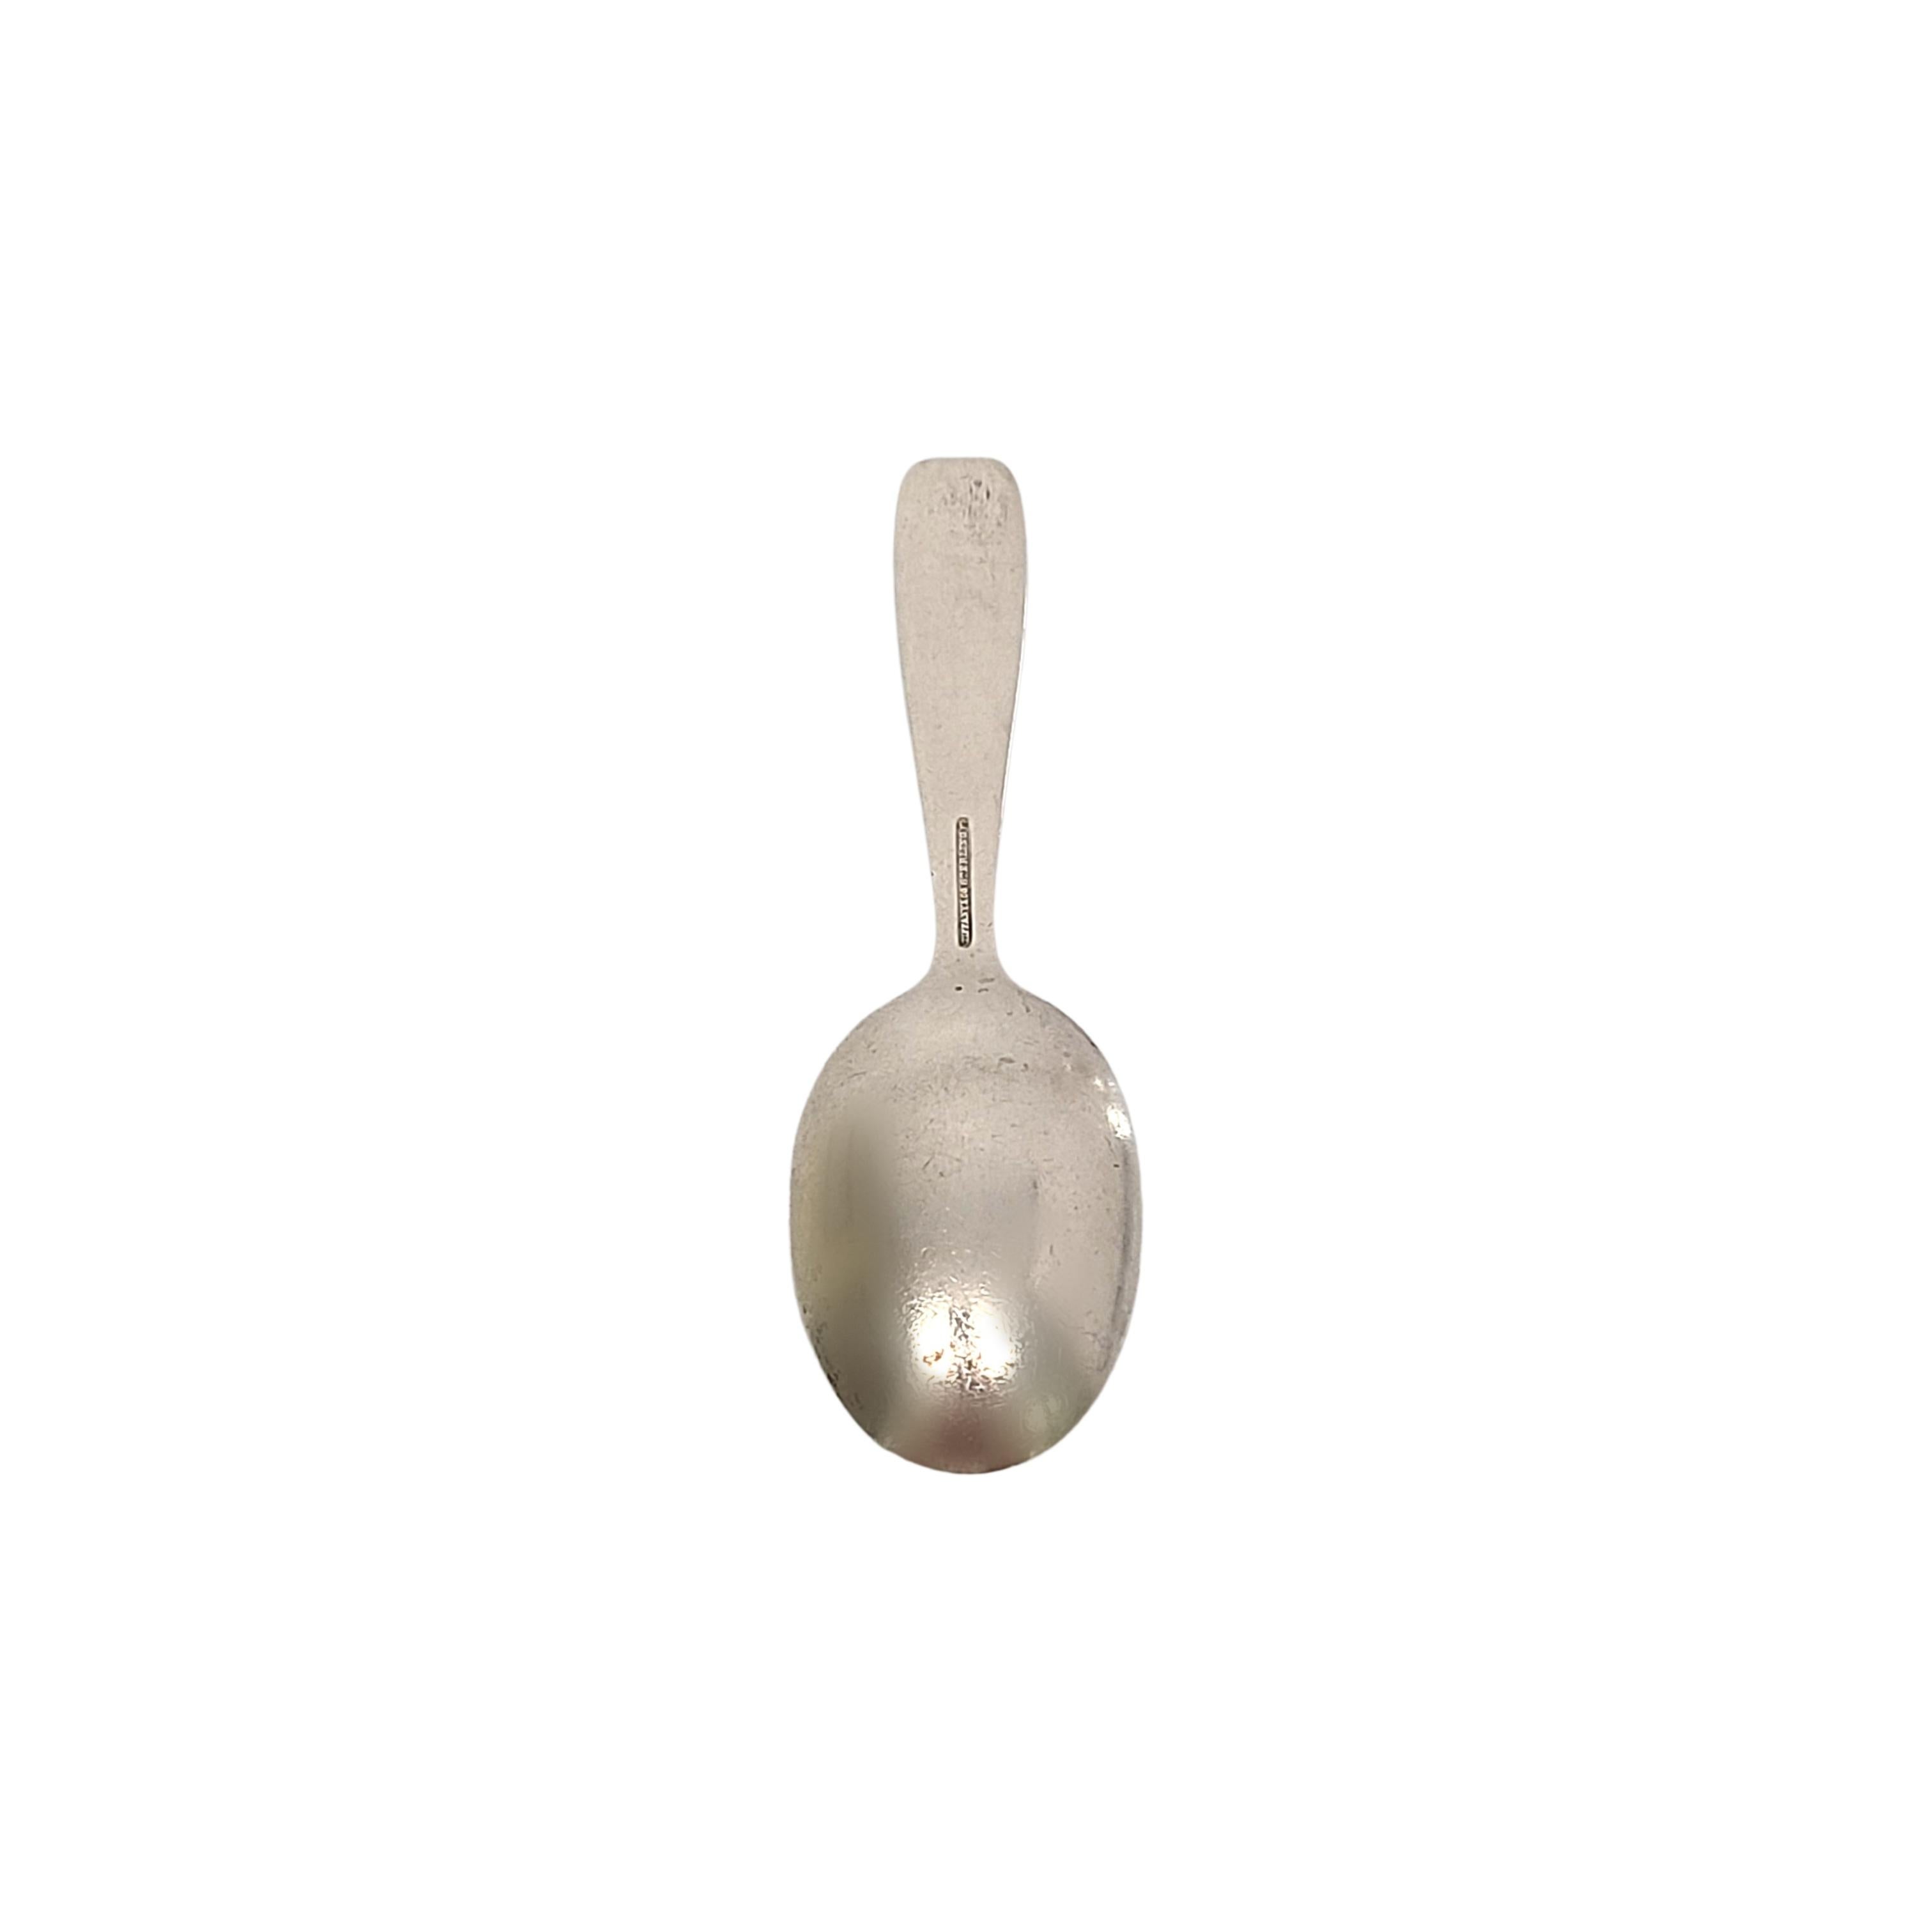 Tiffany & Co sterling silver child/baby feeding spoon in the Cordis pattern.

Cordis is a simple and classic design. No monogram or engraving. Does not include Tiffany & Co box or pouch. The M mark on this spoon dates it to manufacture under the